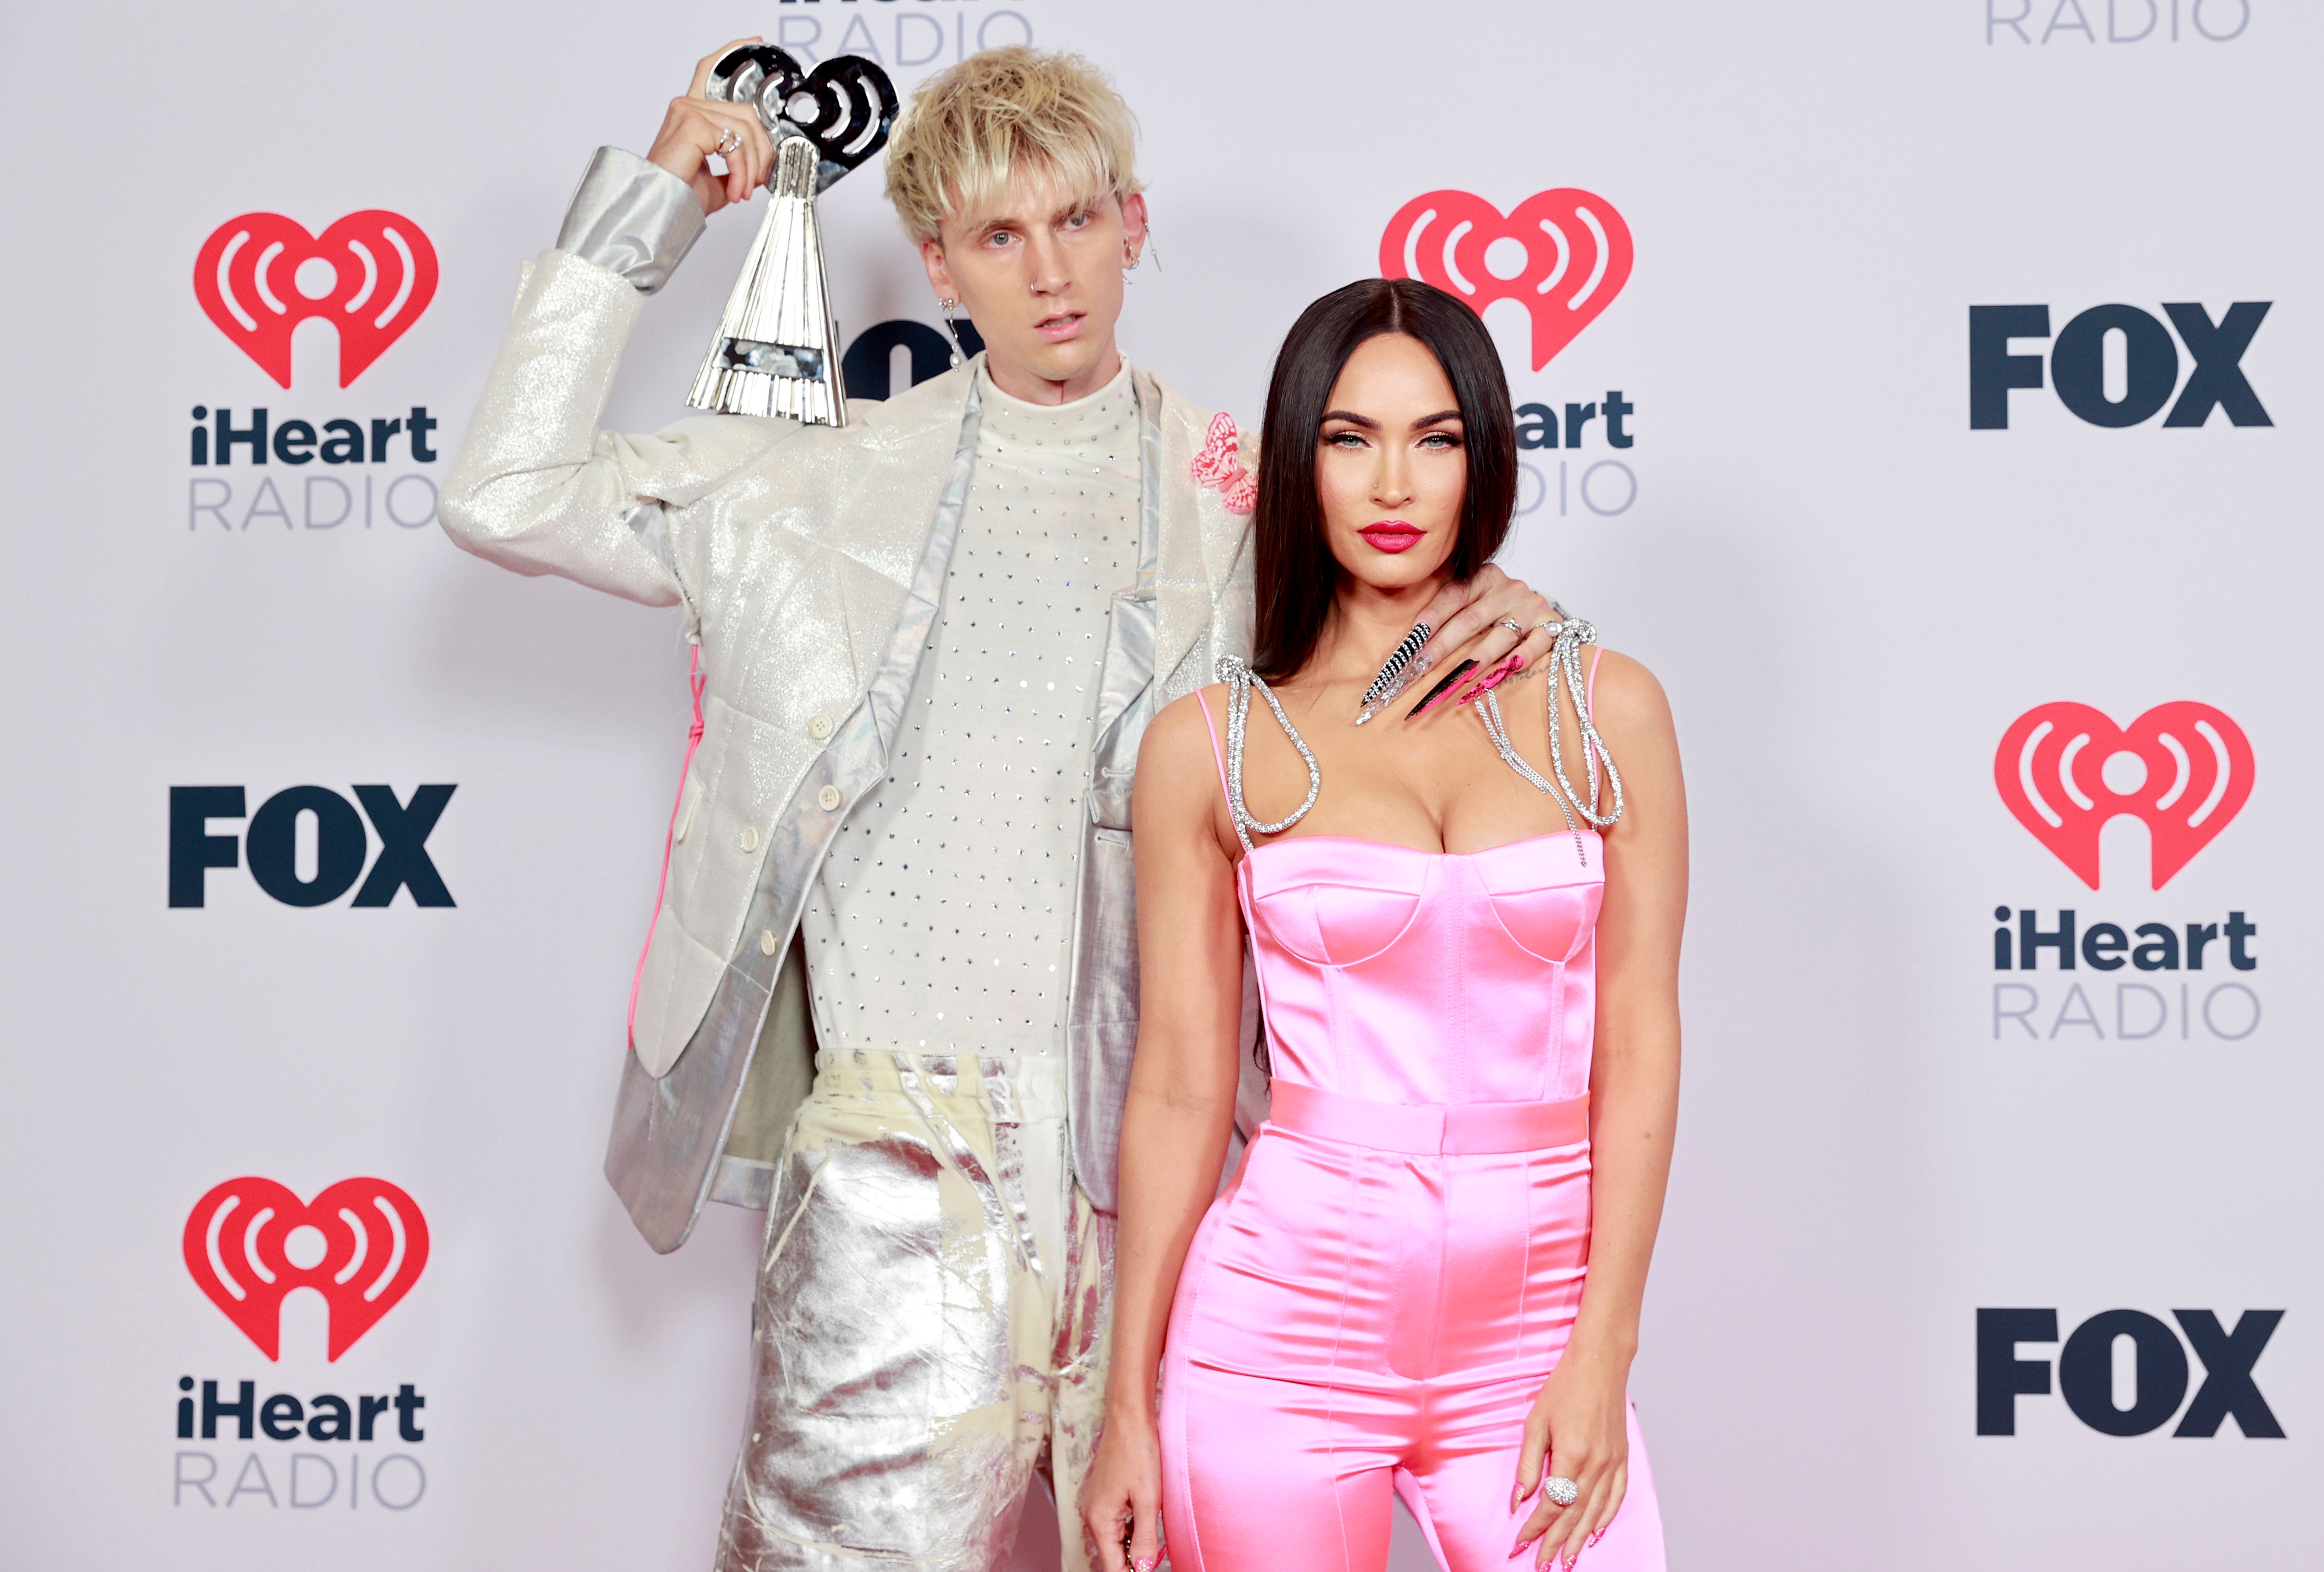 Machine Gun Kelly, winner of the Alternative Rock Album of the Year award for 'Tickets To My Downfall,’ and Megan Fox attend the 2021 iHeartRadio Music Awards at The Dolby Theatre in Los Angeles, California